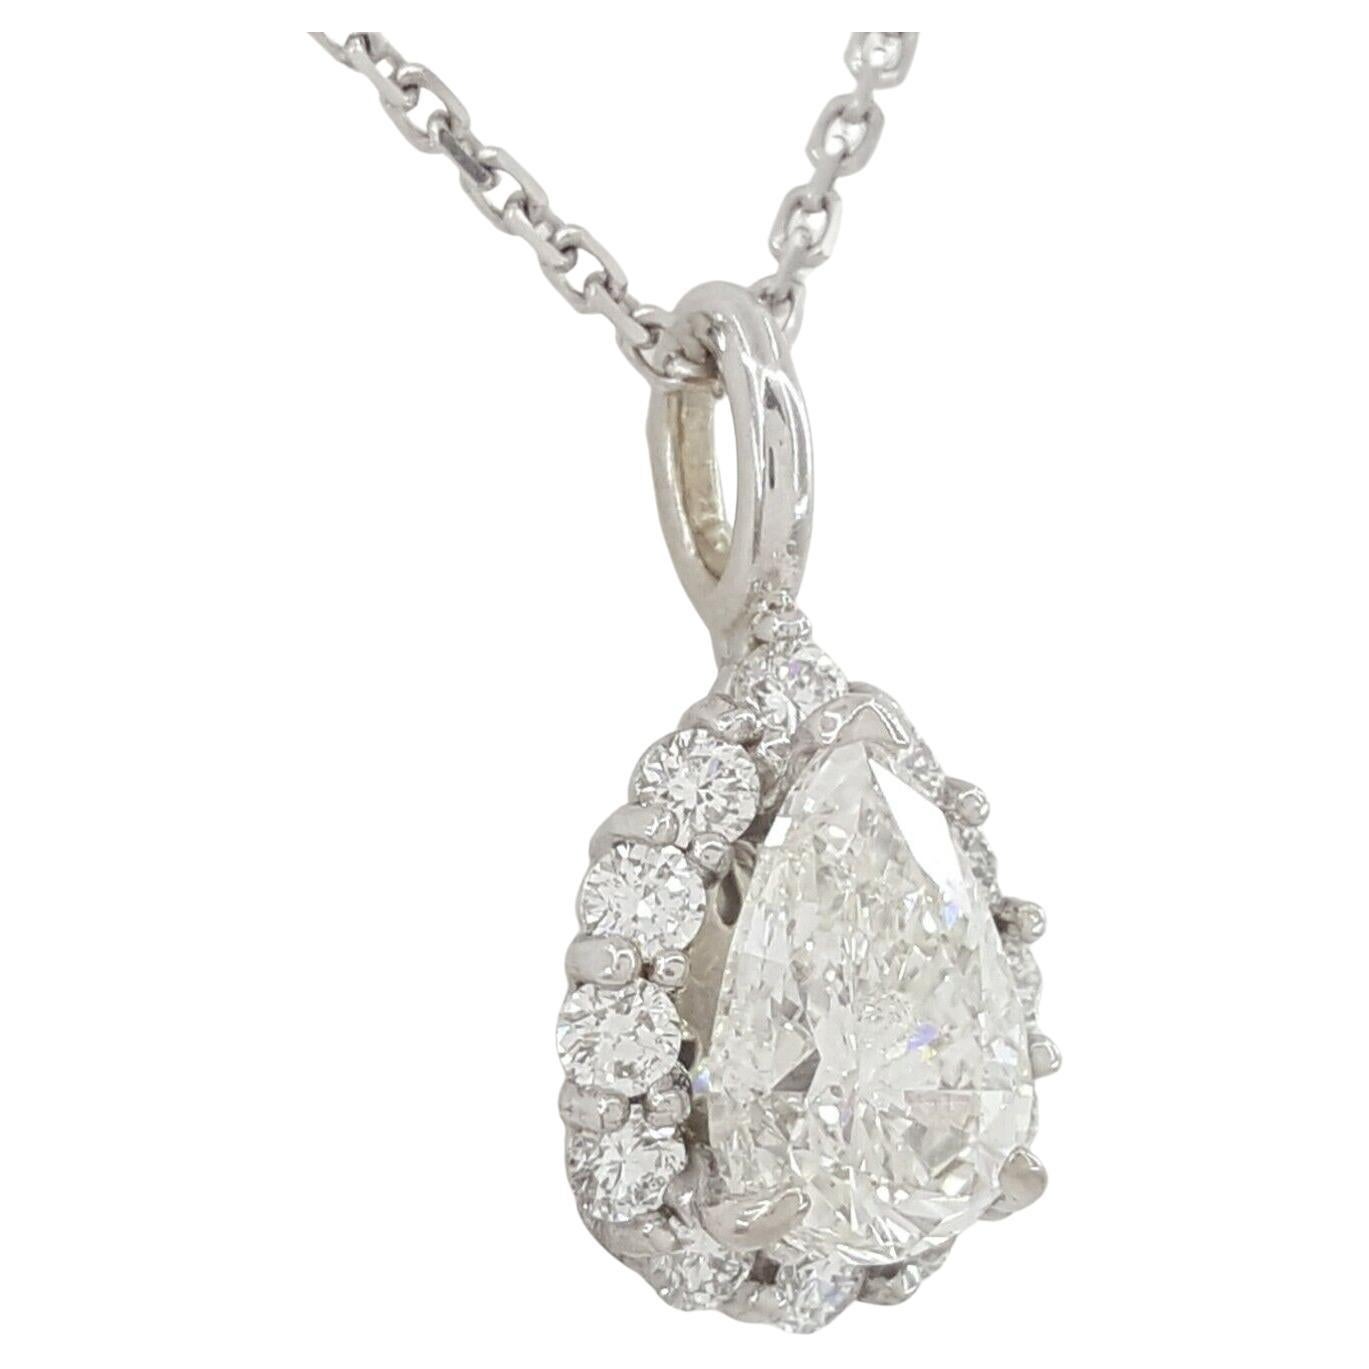 Radiate elegance and sophistication with this exquisite GIA Certified 1.2 Carat Pear Cut Halo Diamond Pendant Necklace. At the heart of this stunning pendant gleams a brilliant pear-cut diamond, certified by the renowned Gemological Institute of